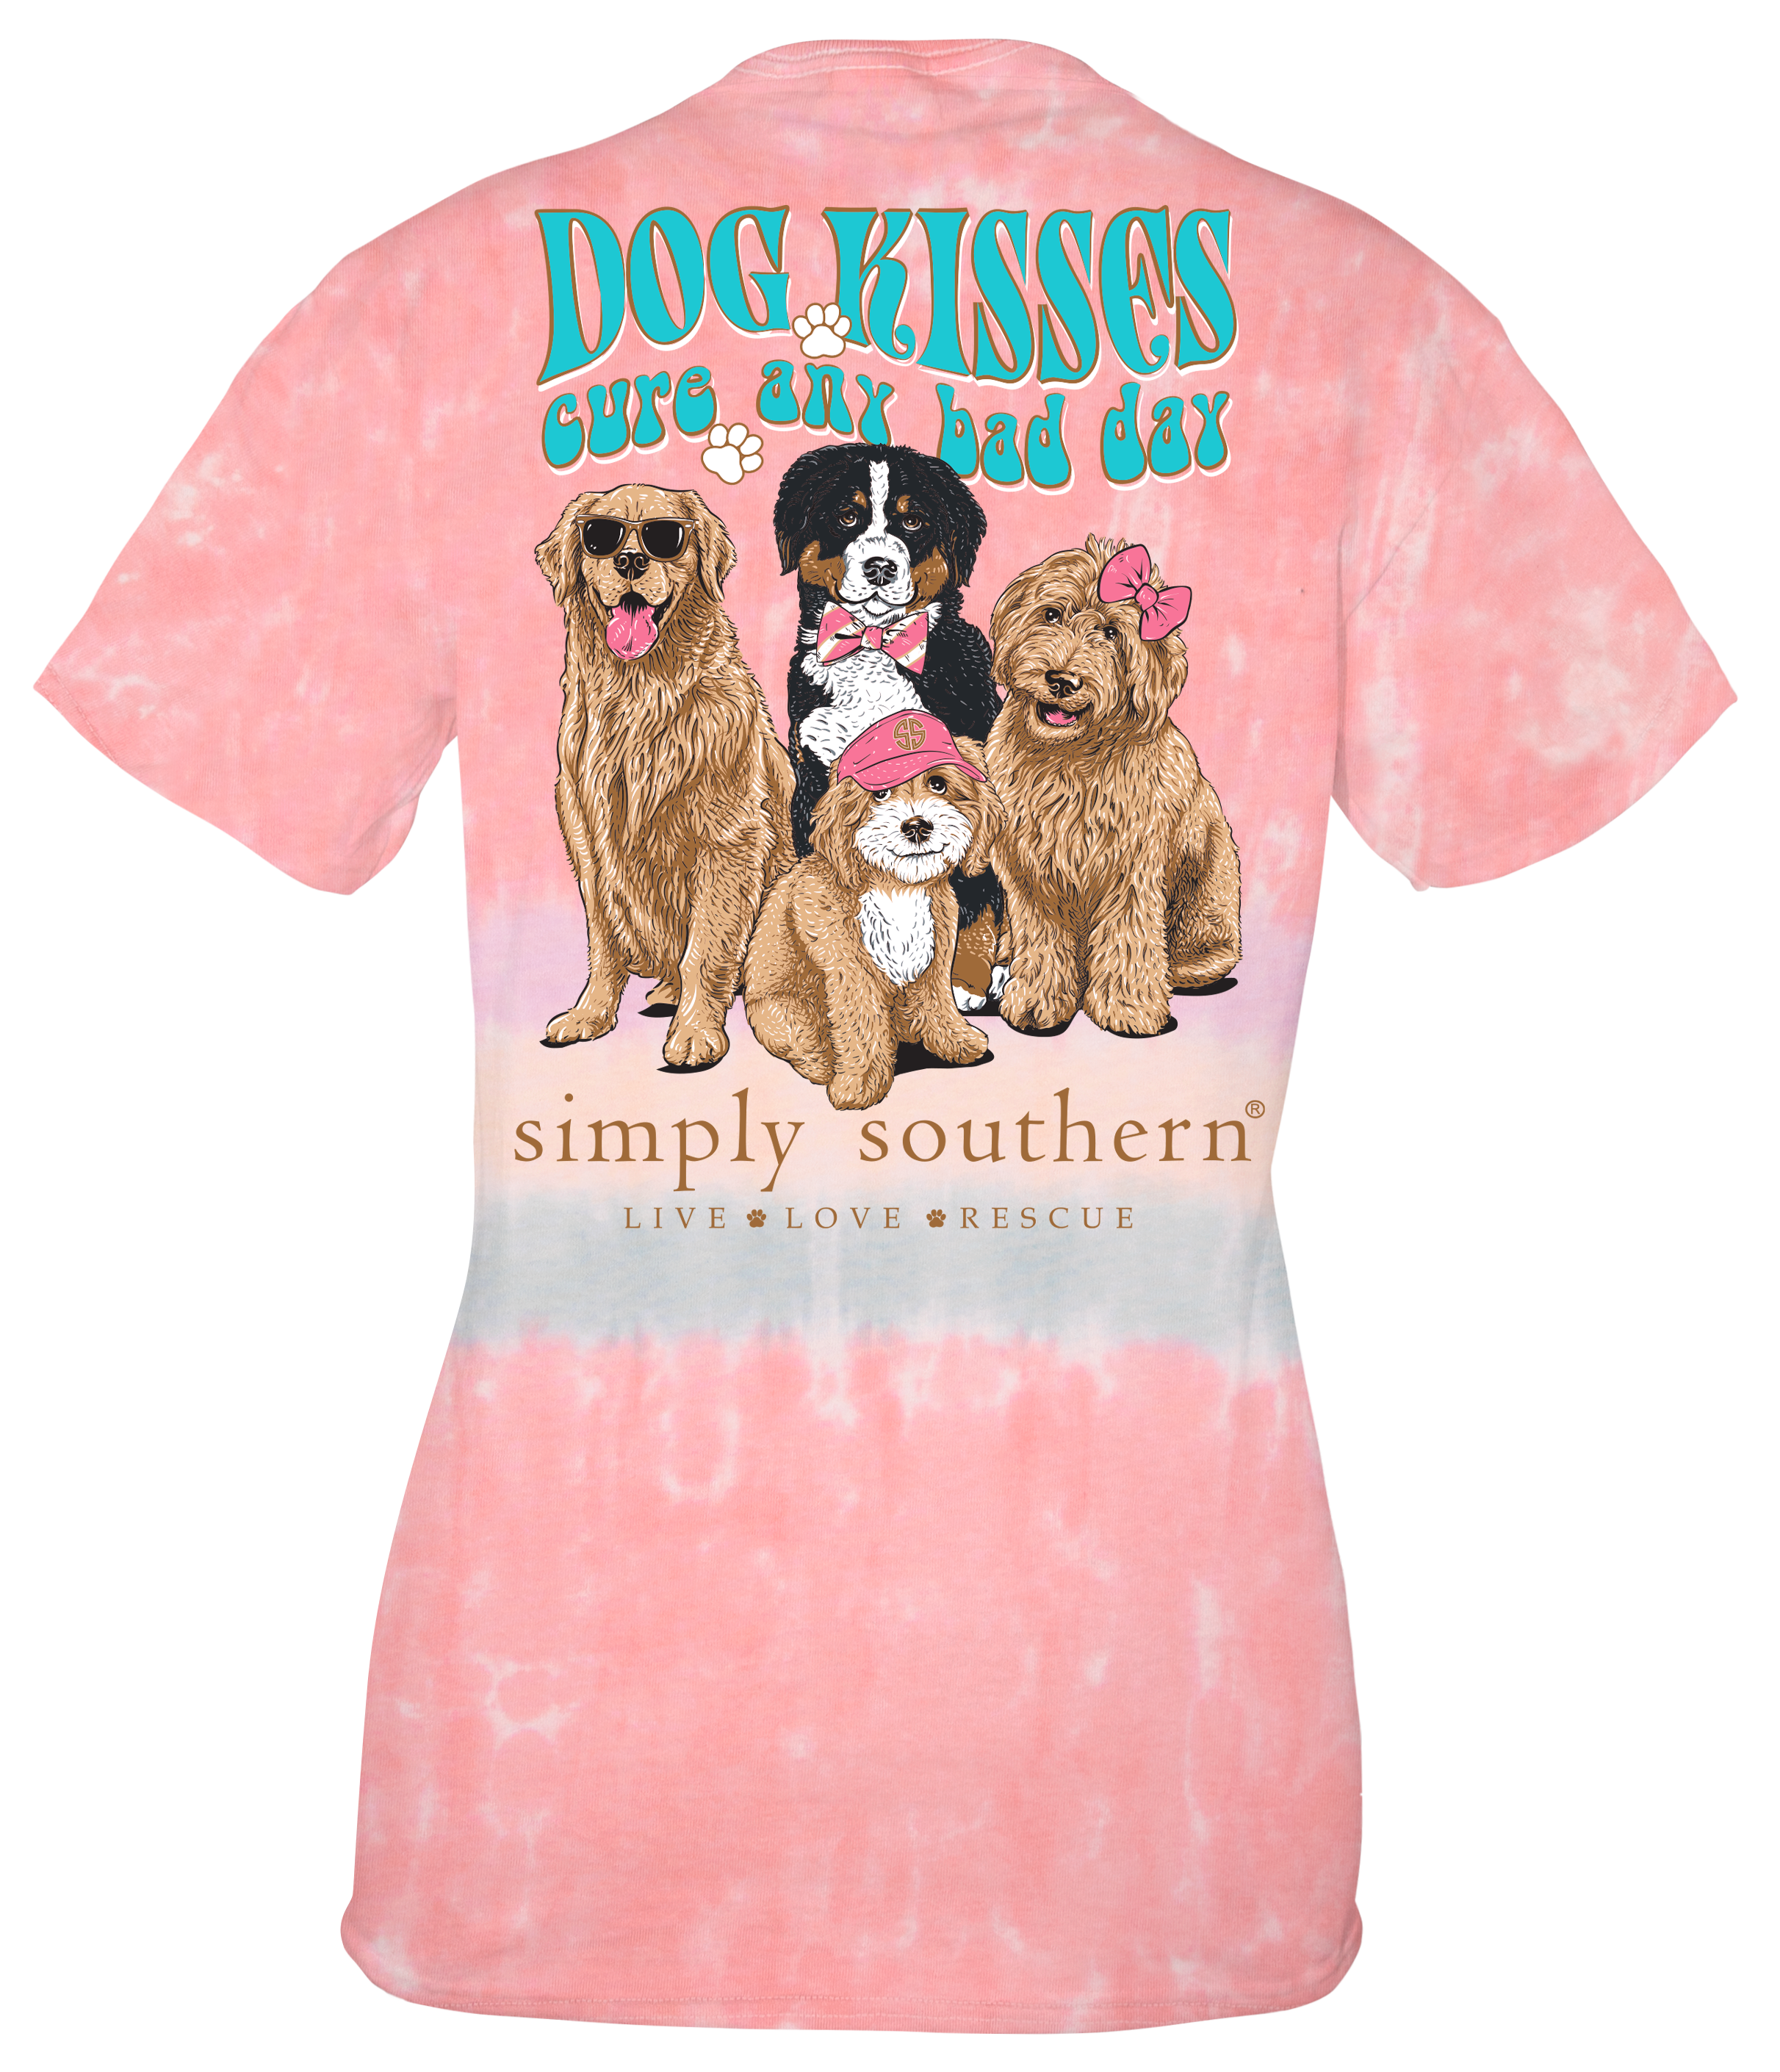 'Dog Kisses Cure Any Bad Day' Tie Dye Short Sleeve Tee by Simply Southern